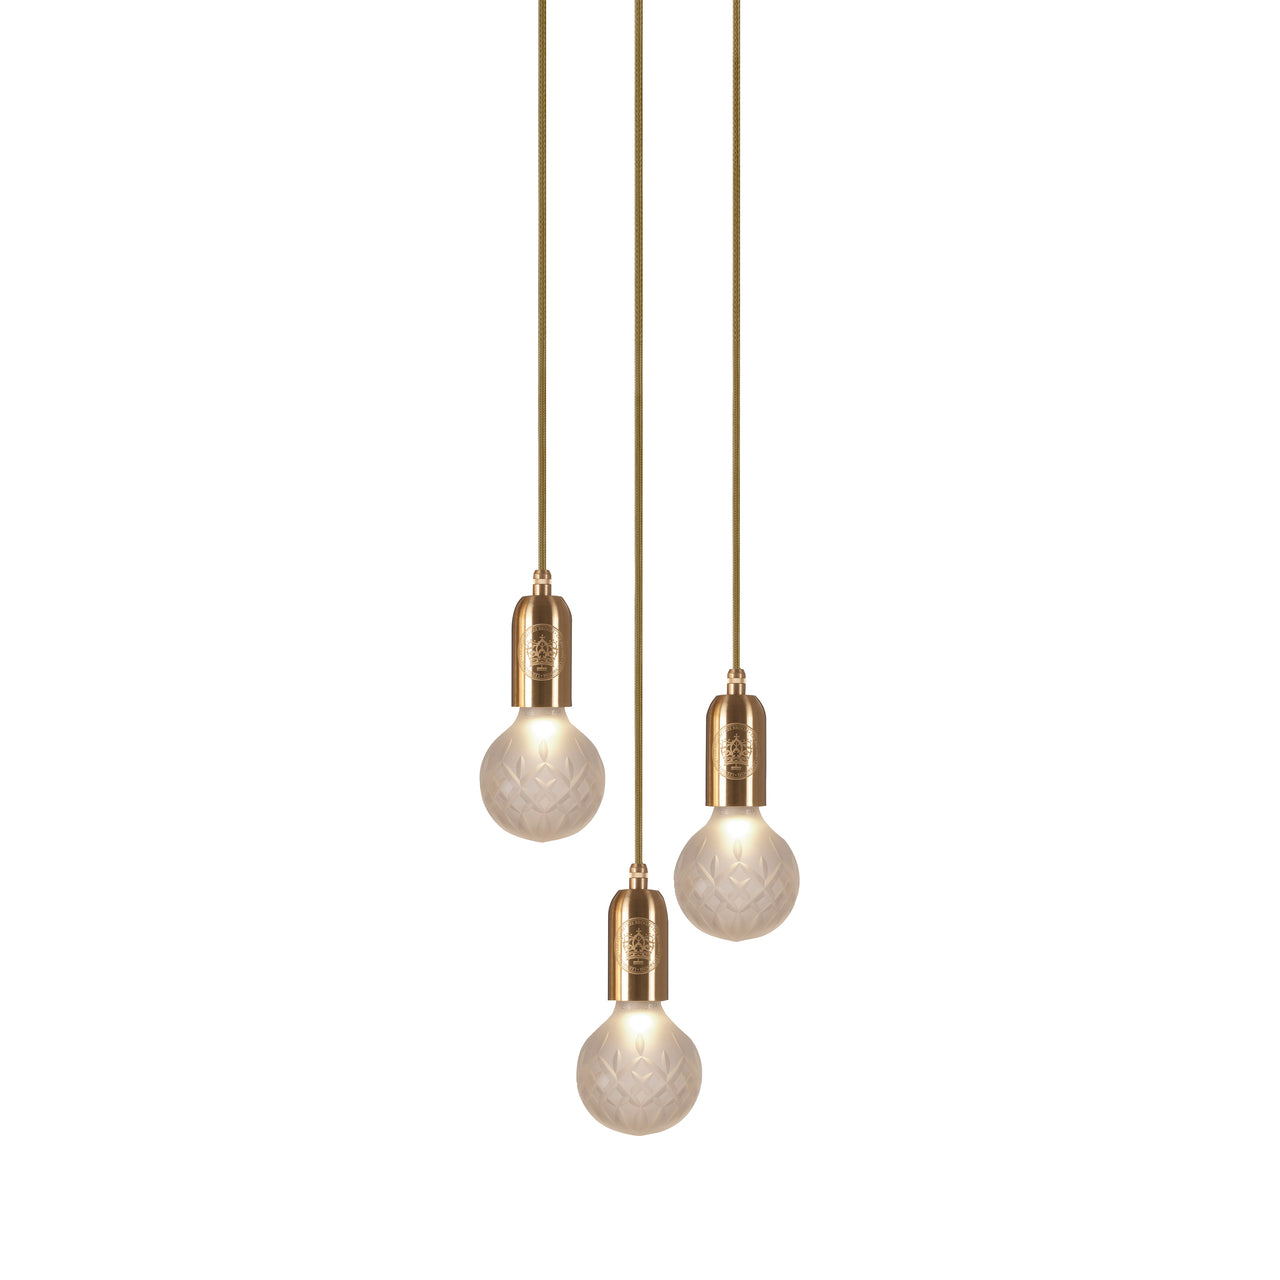 Crystal Bulb Chandelier: 3 Bulb + Brushed Brass + Frosted